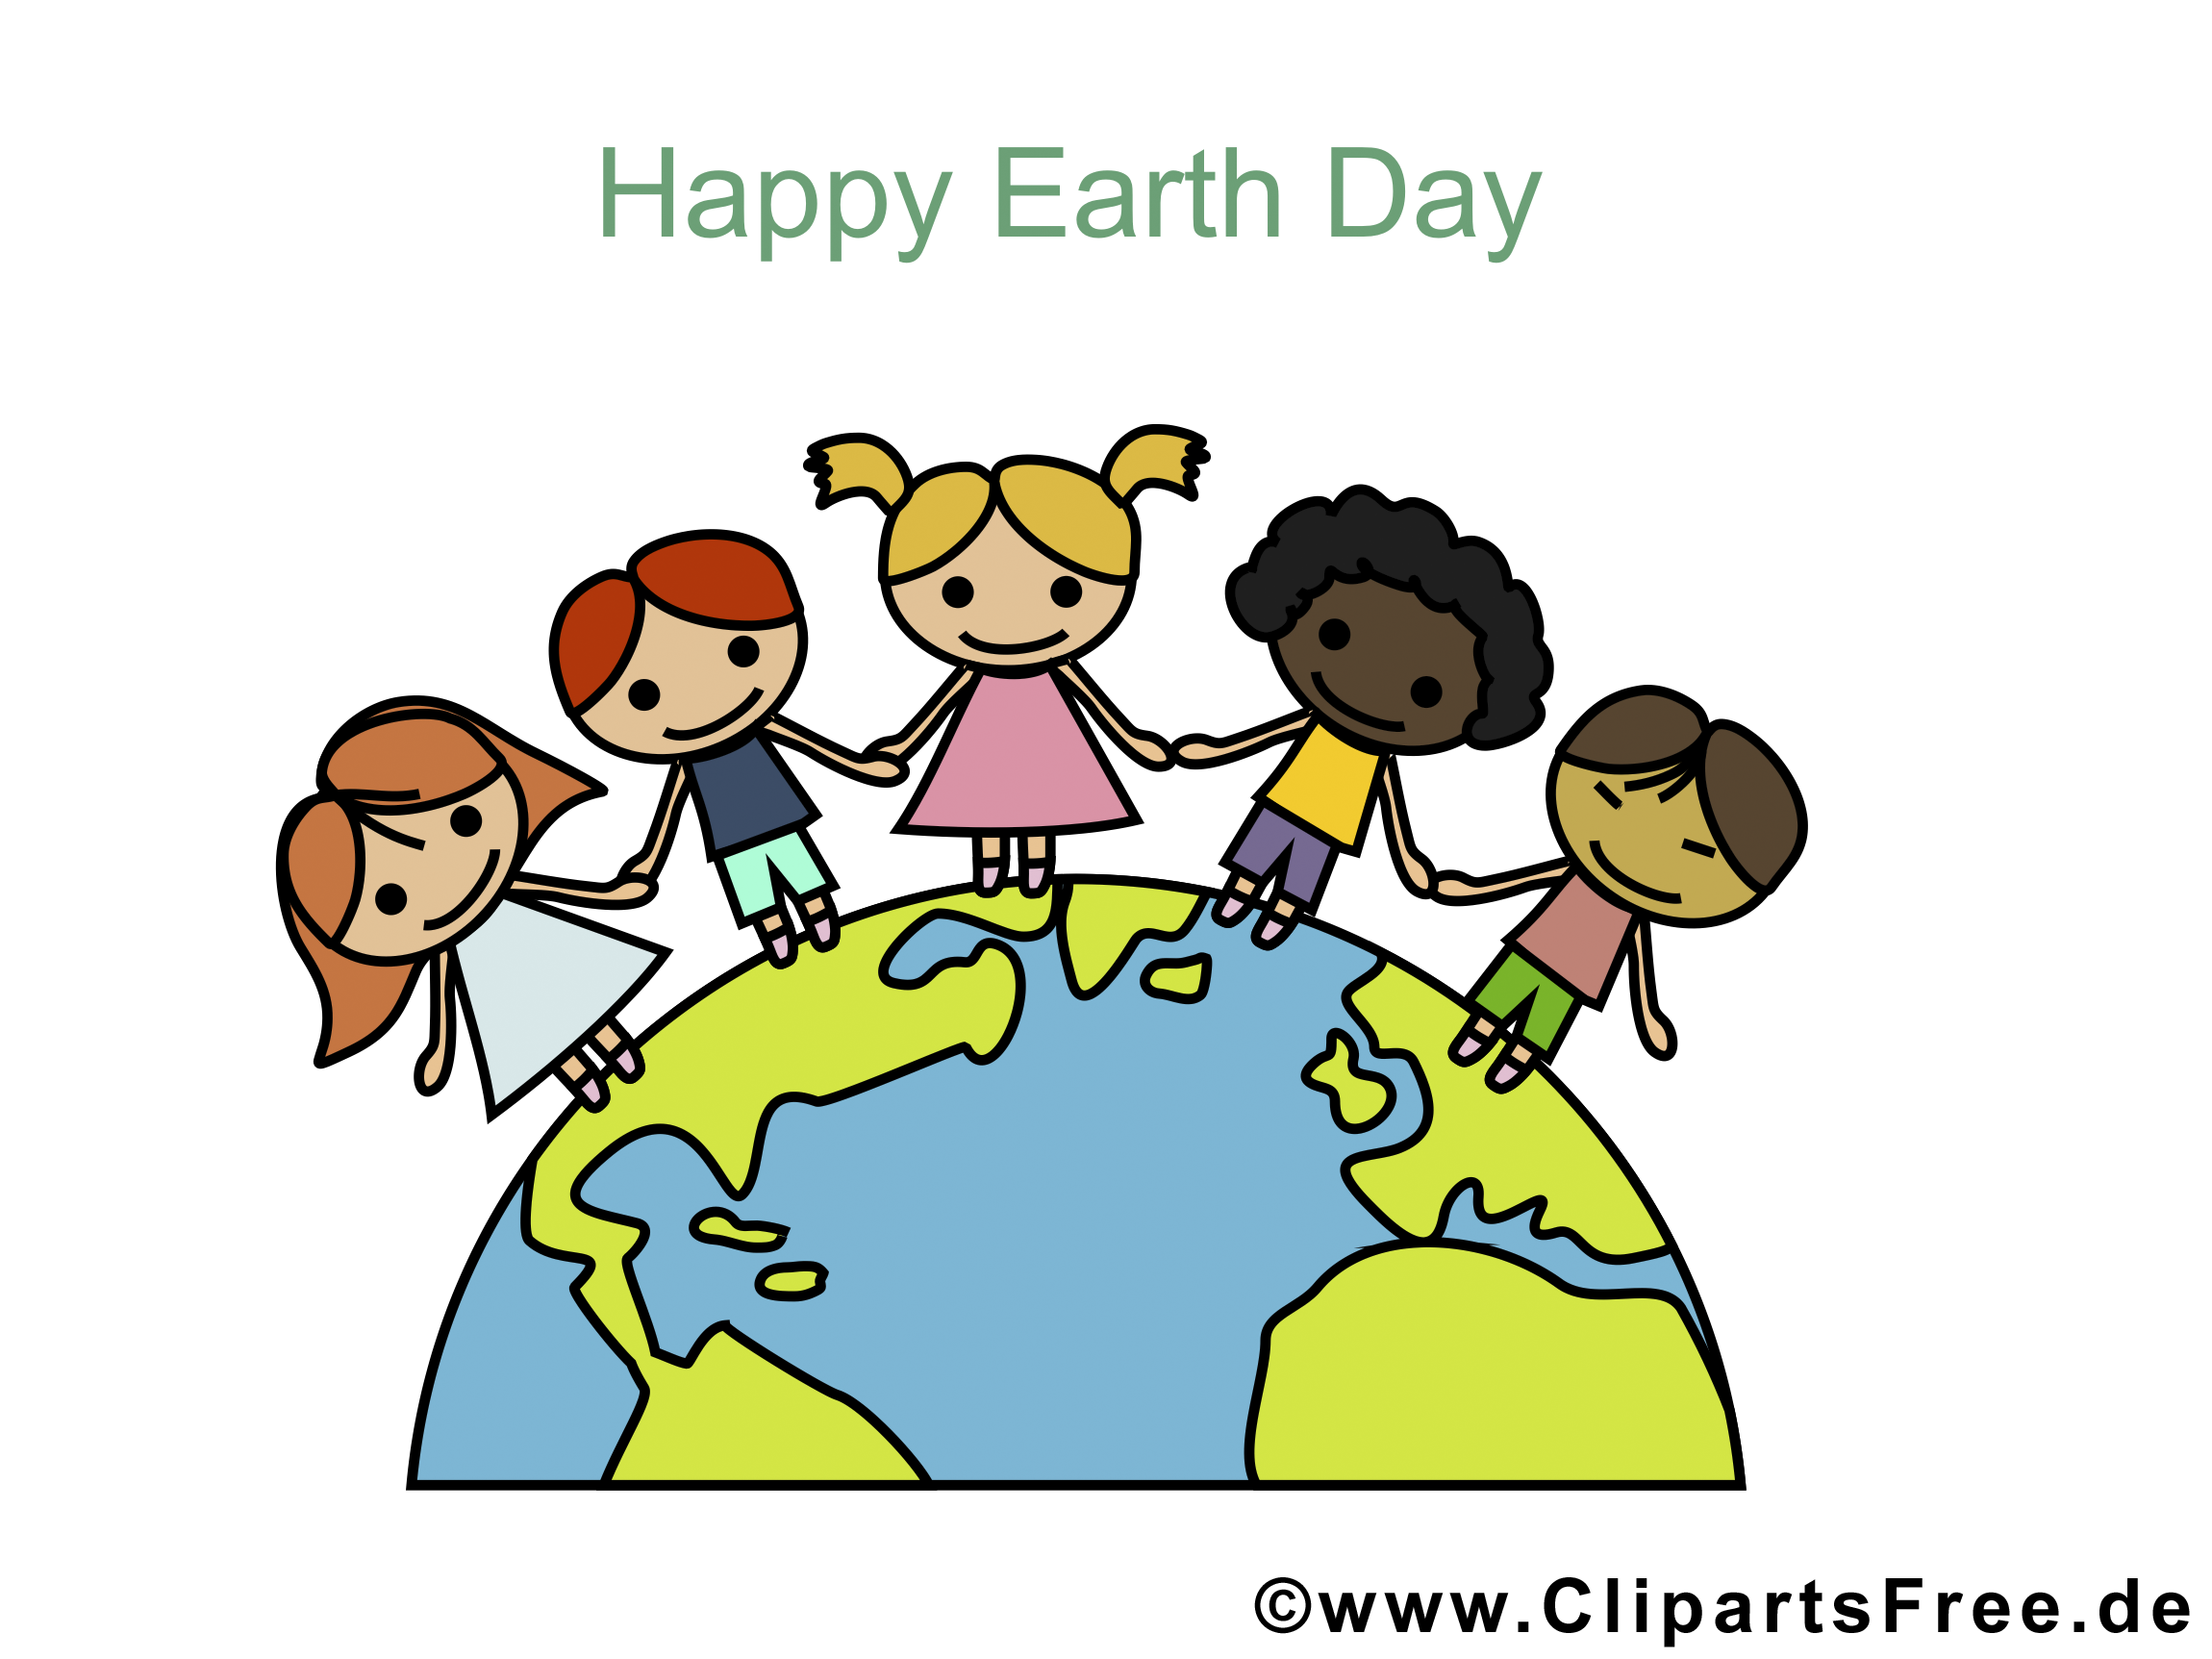 clip art for earth day - photo #36